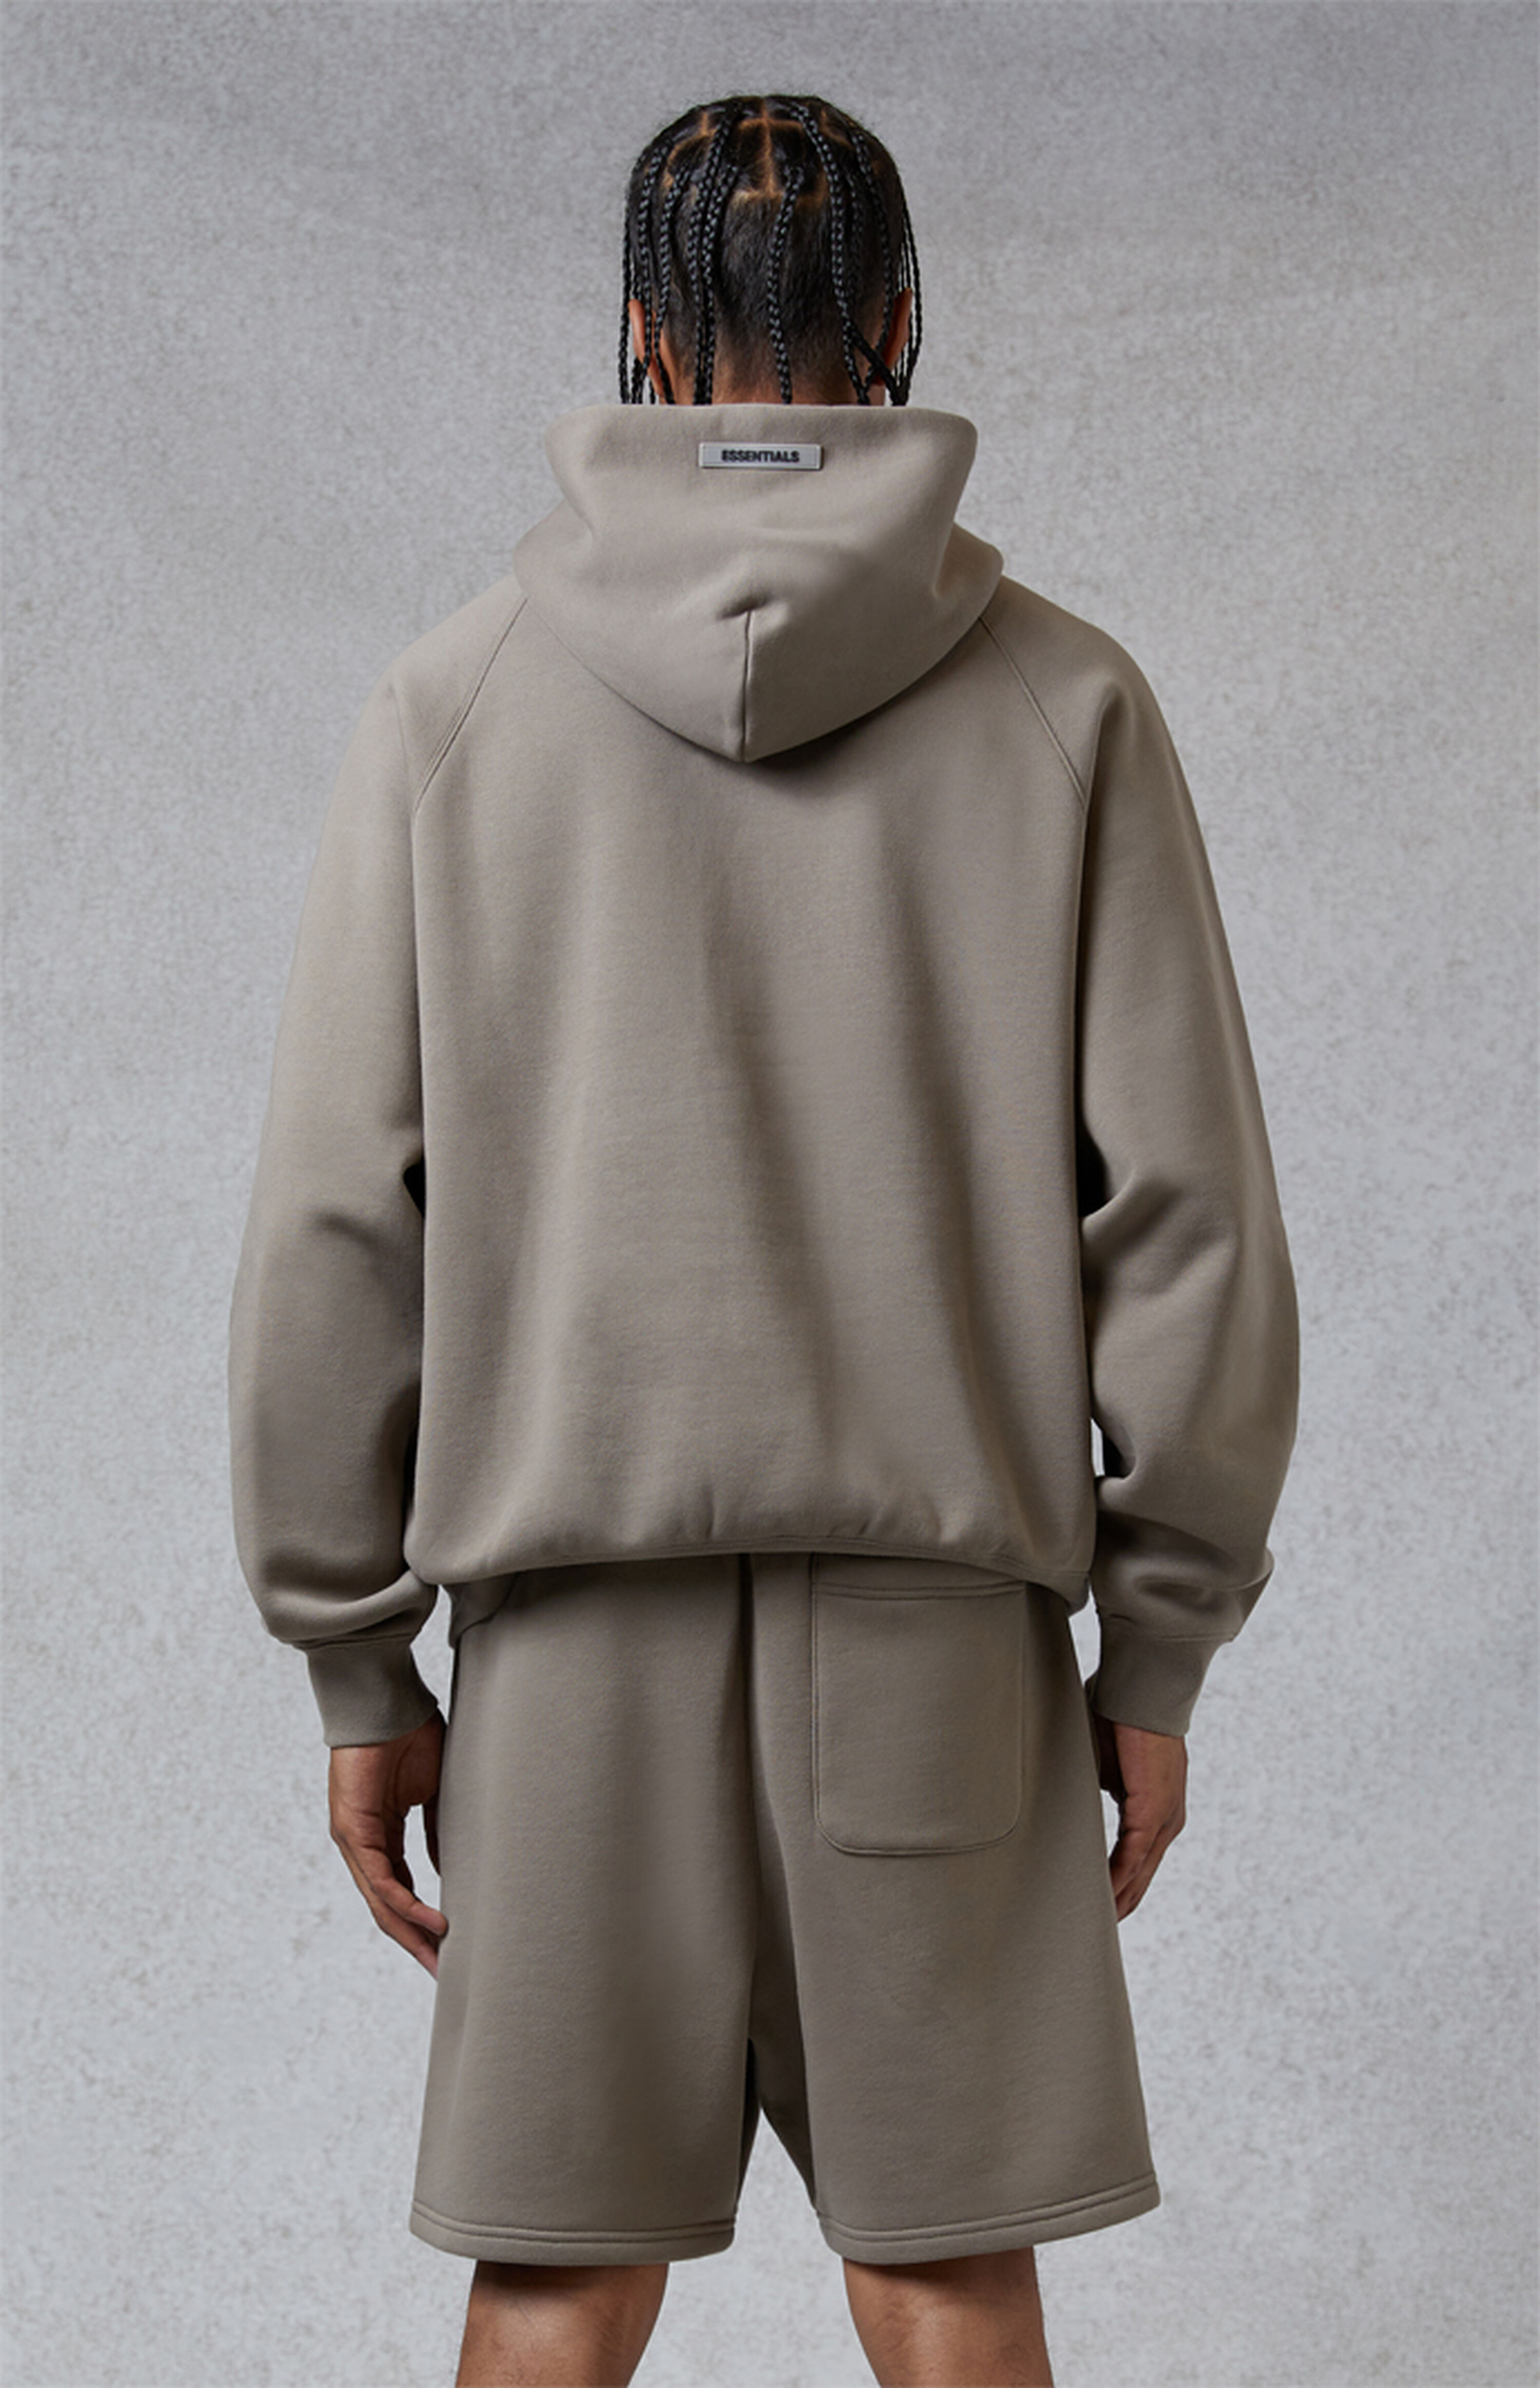 Fear of God Essentials Essentials Taupe Hoodie | PacSun